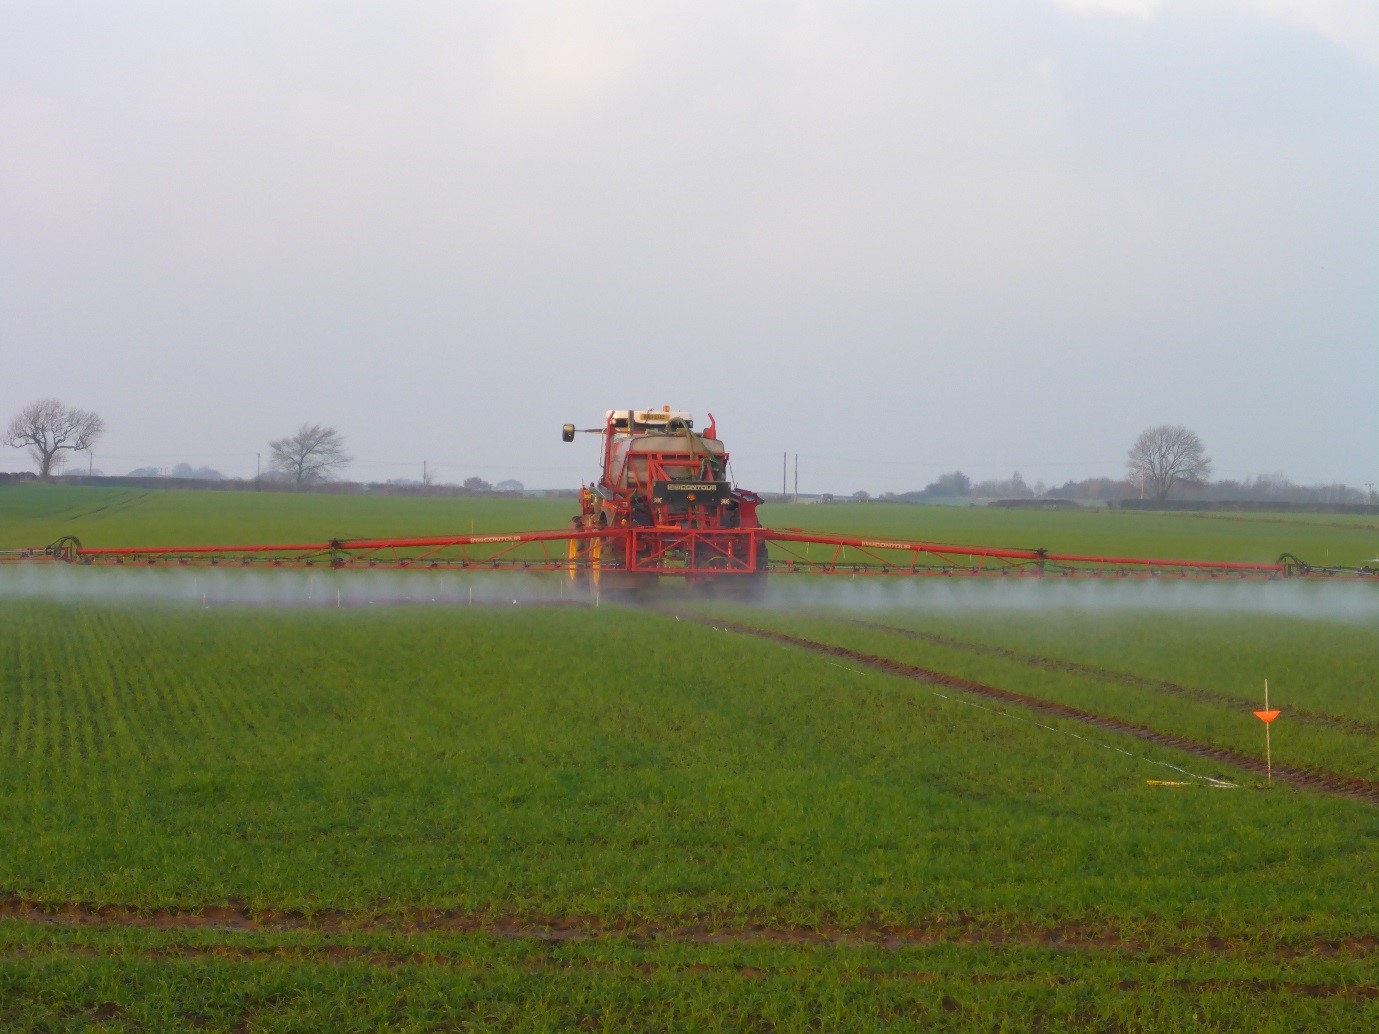 Tractor spraying herbicide onto a field 